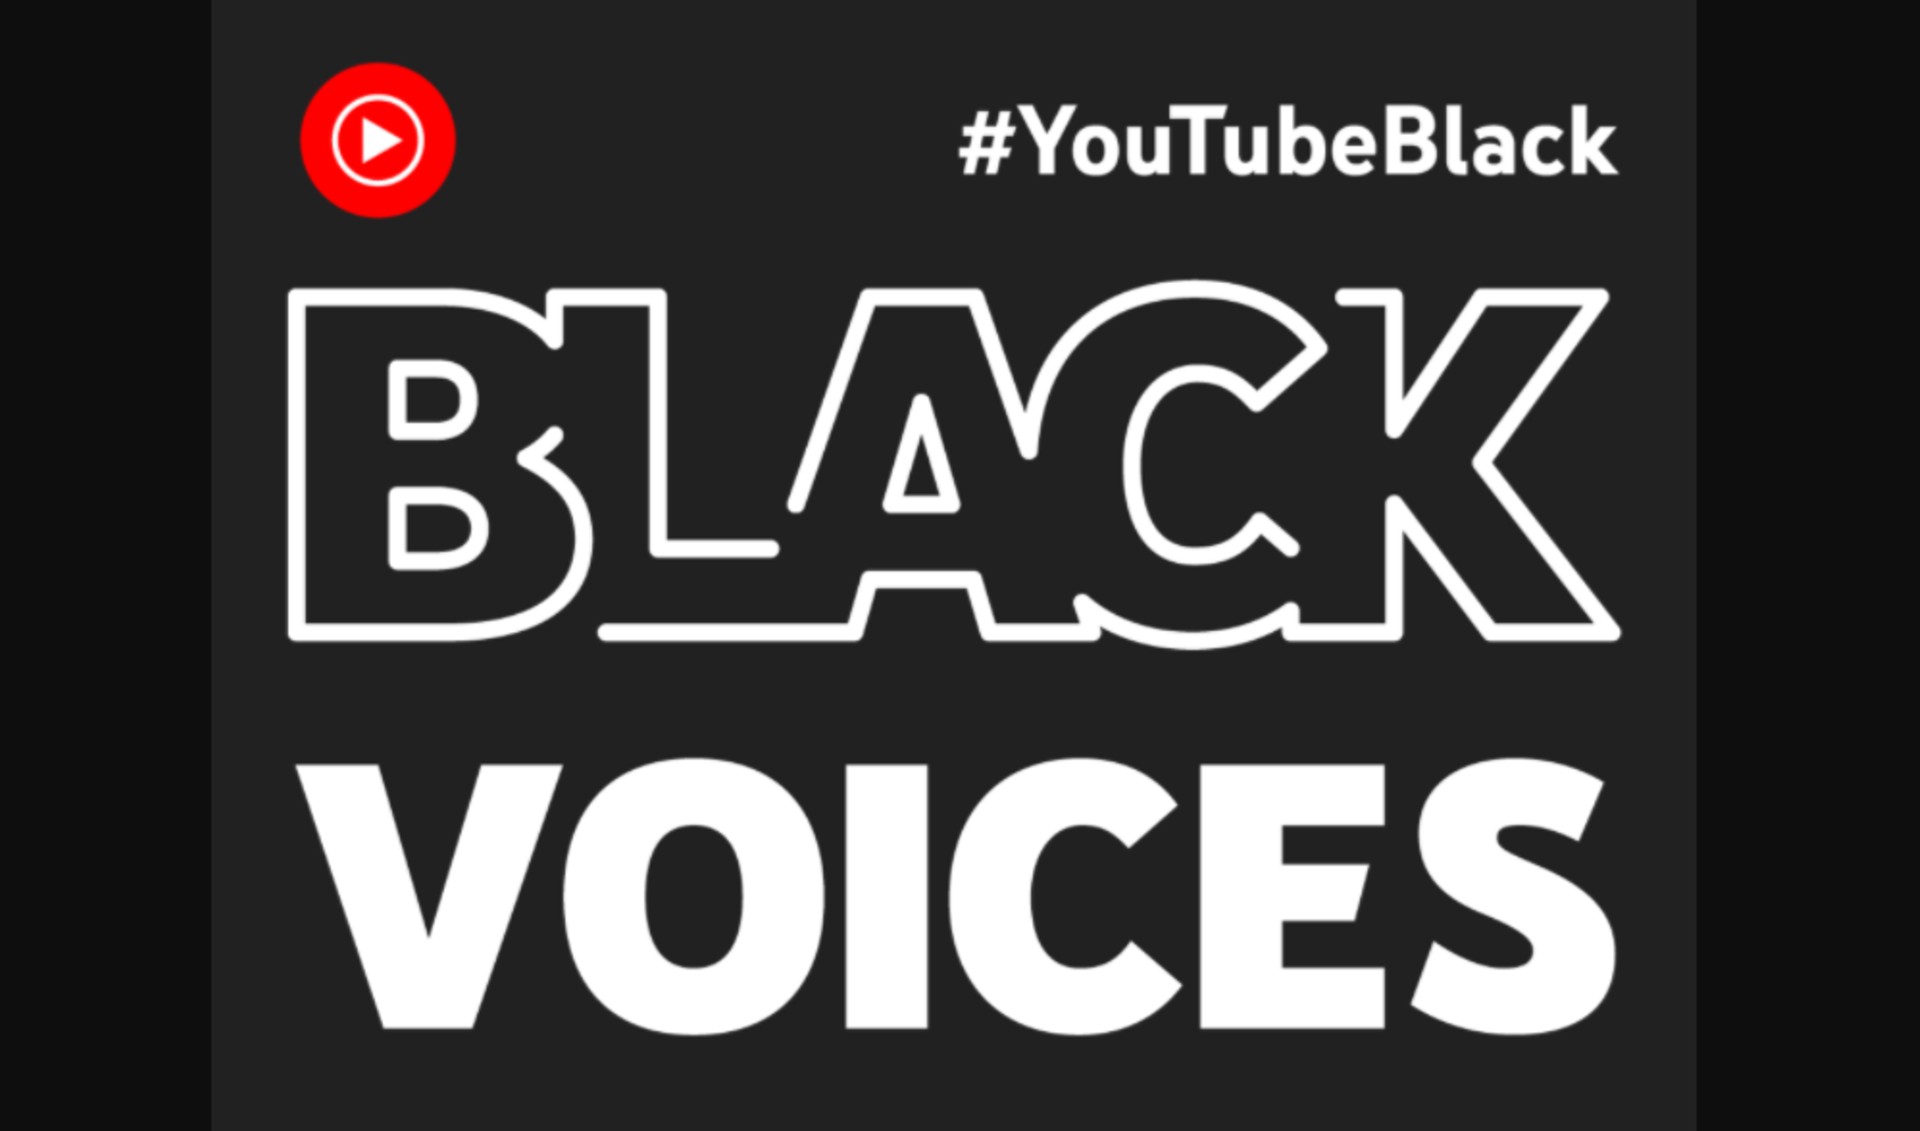 YouTube To Open Applications For Second Class Of #YouTubeBlack Voices